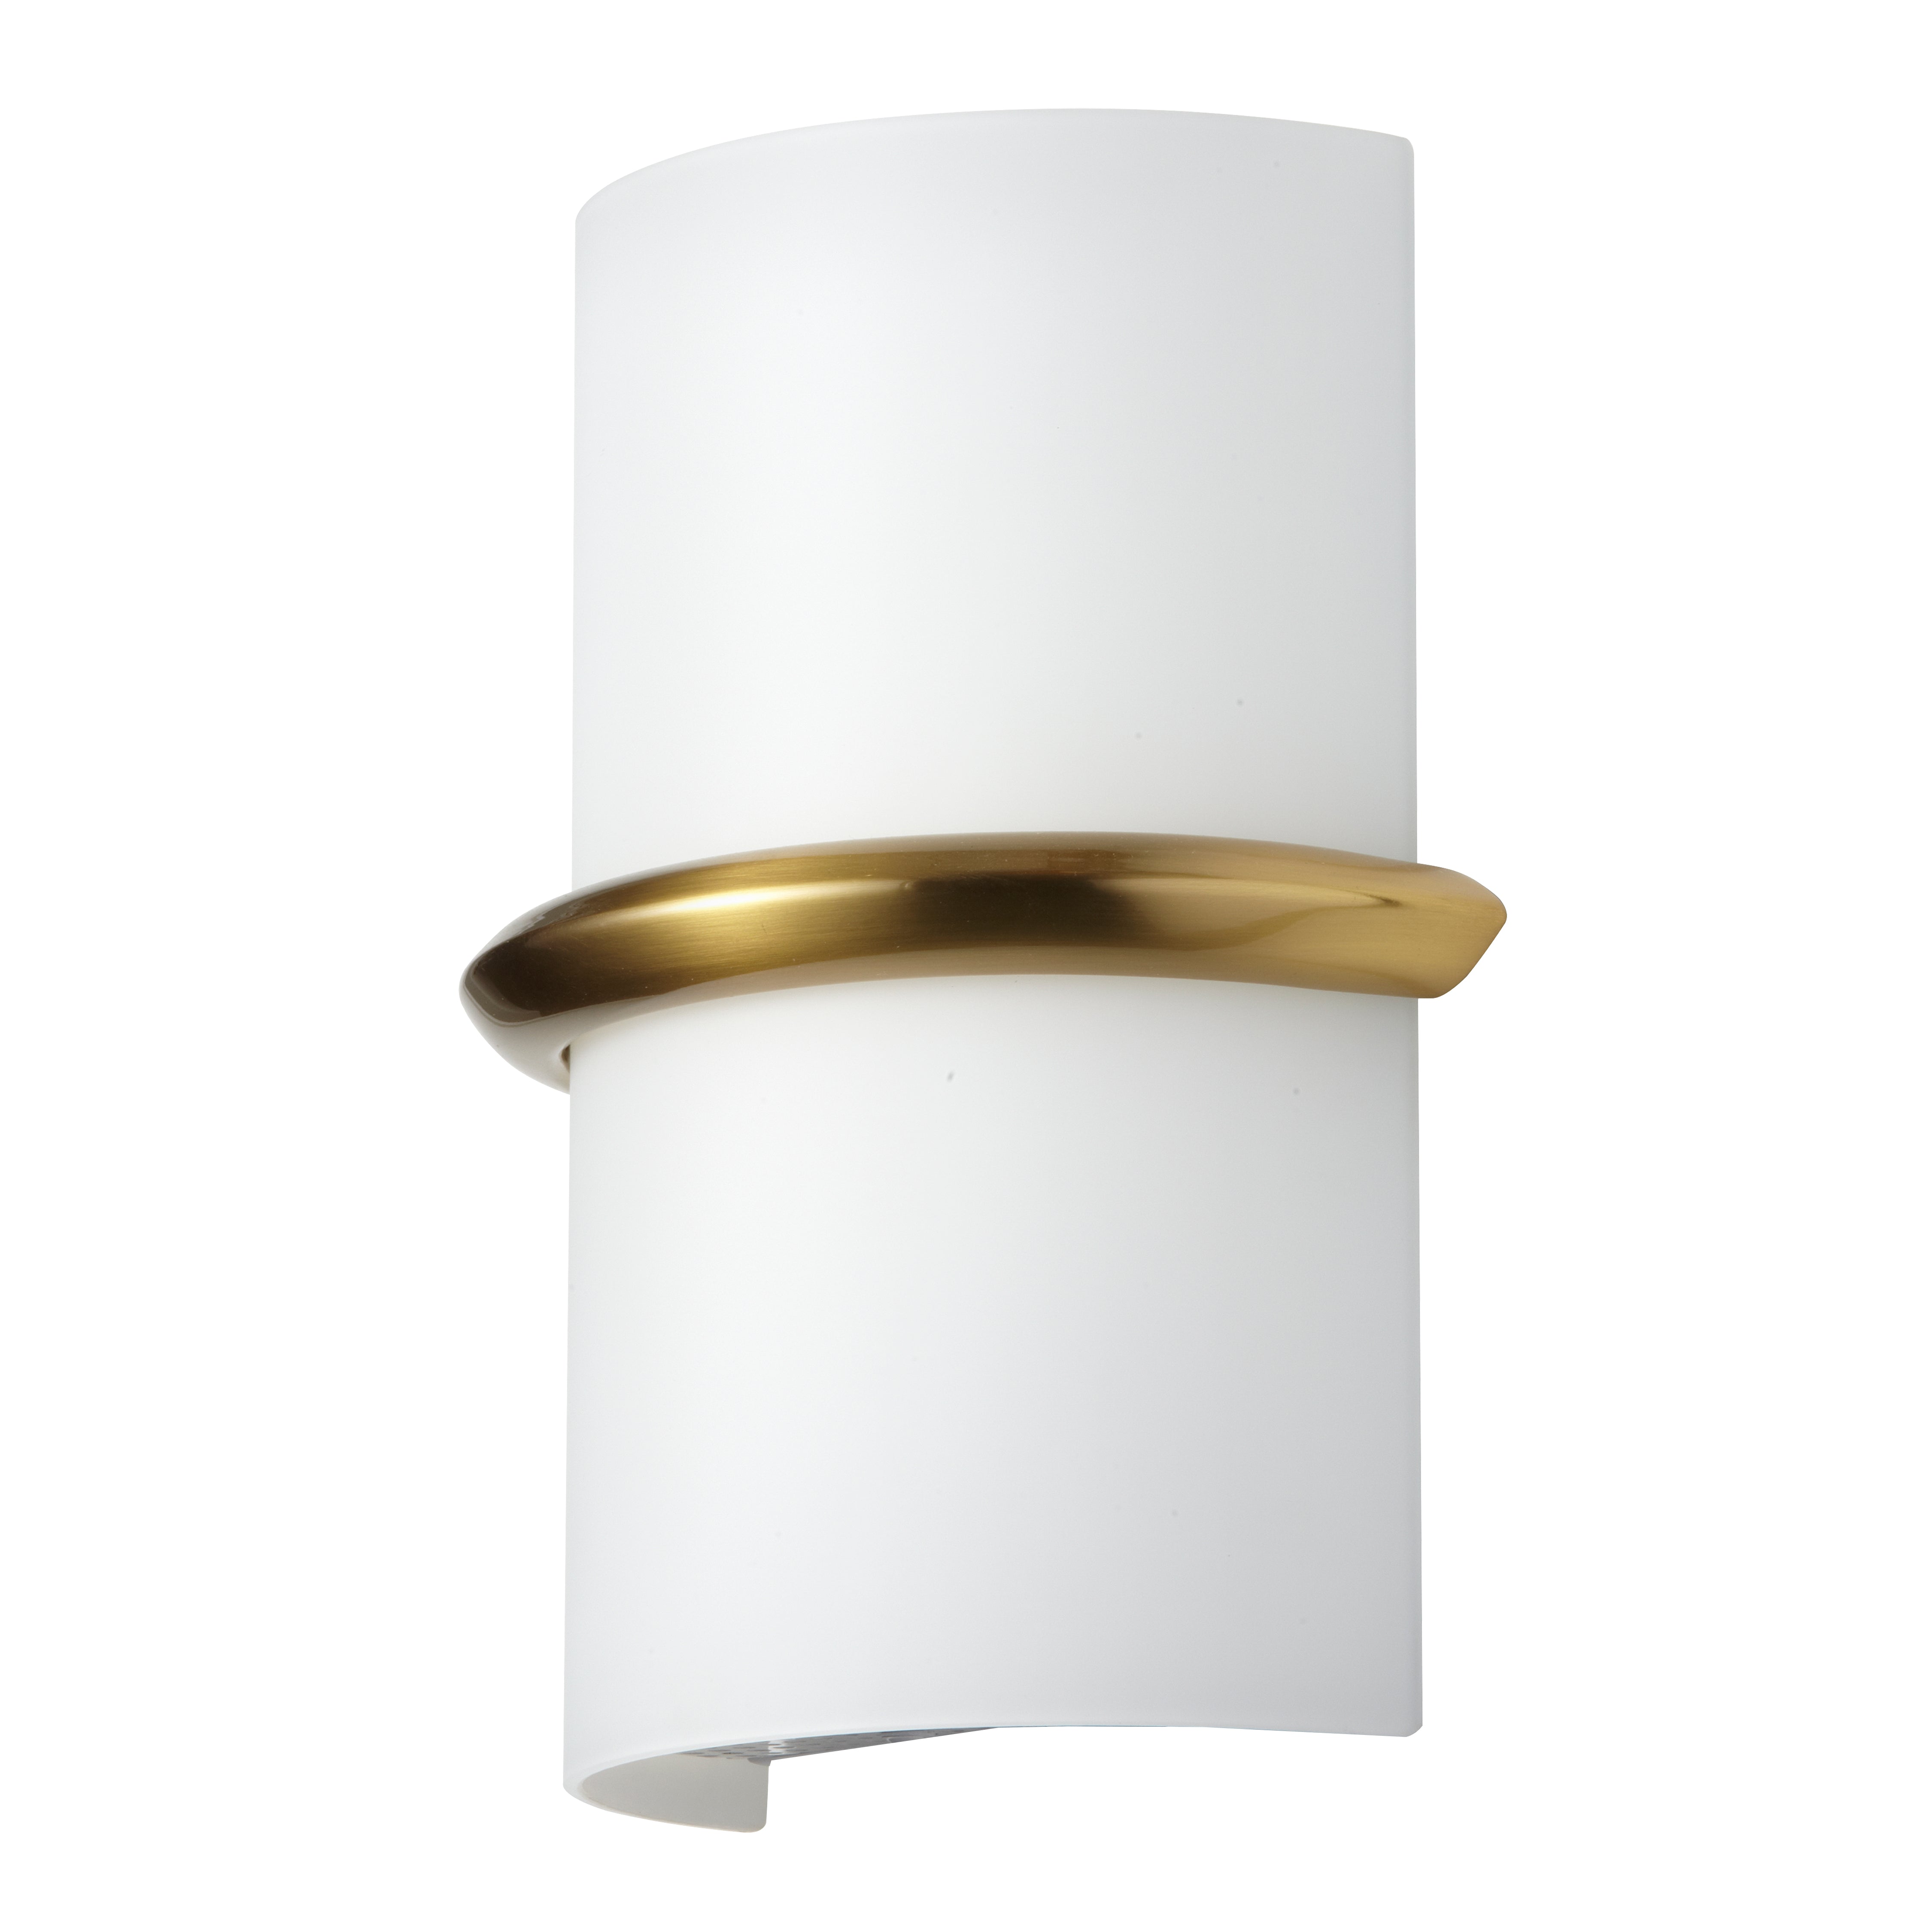 WALLACE Wall sconce White INTEGRATED LED - WLC-914LEDW-AGB | DAINOLITE